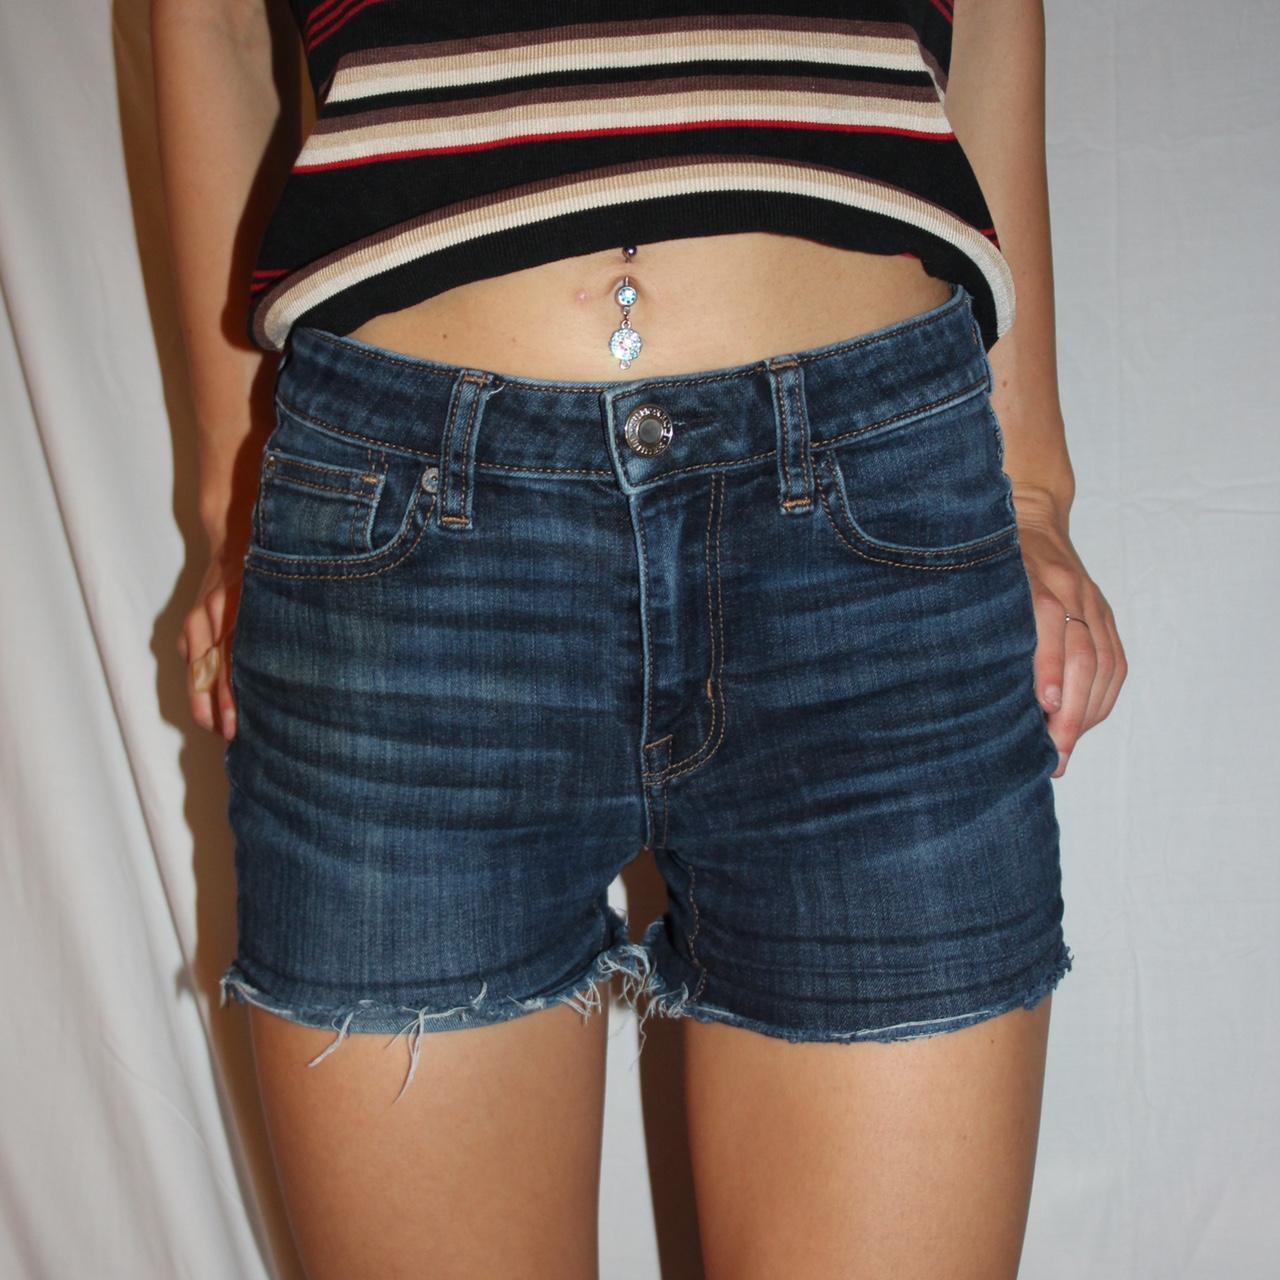 American Eagle Outfitters Women's Blue and Navy Shorts (2)